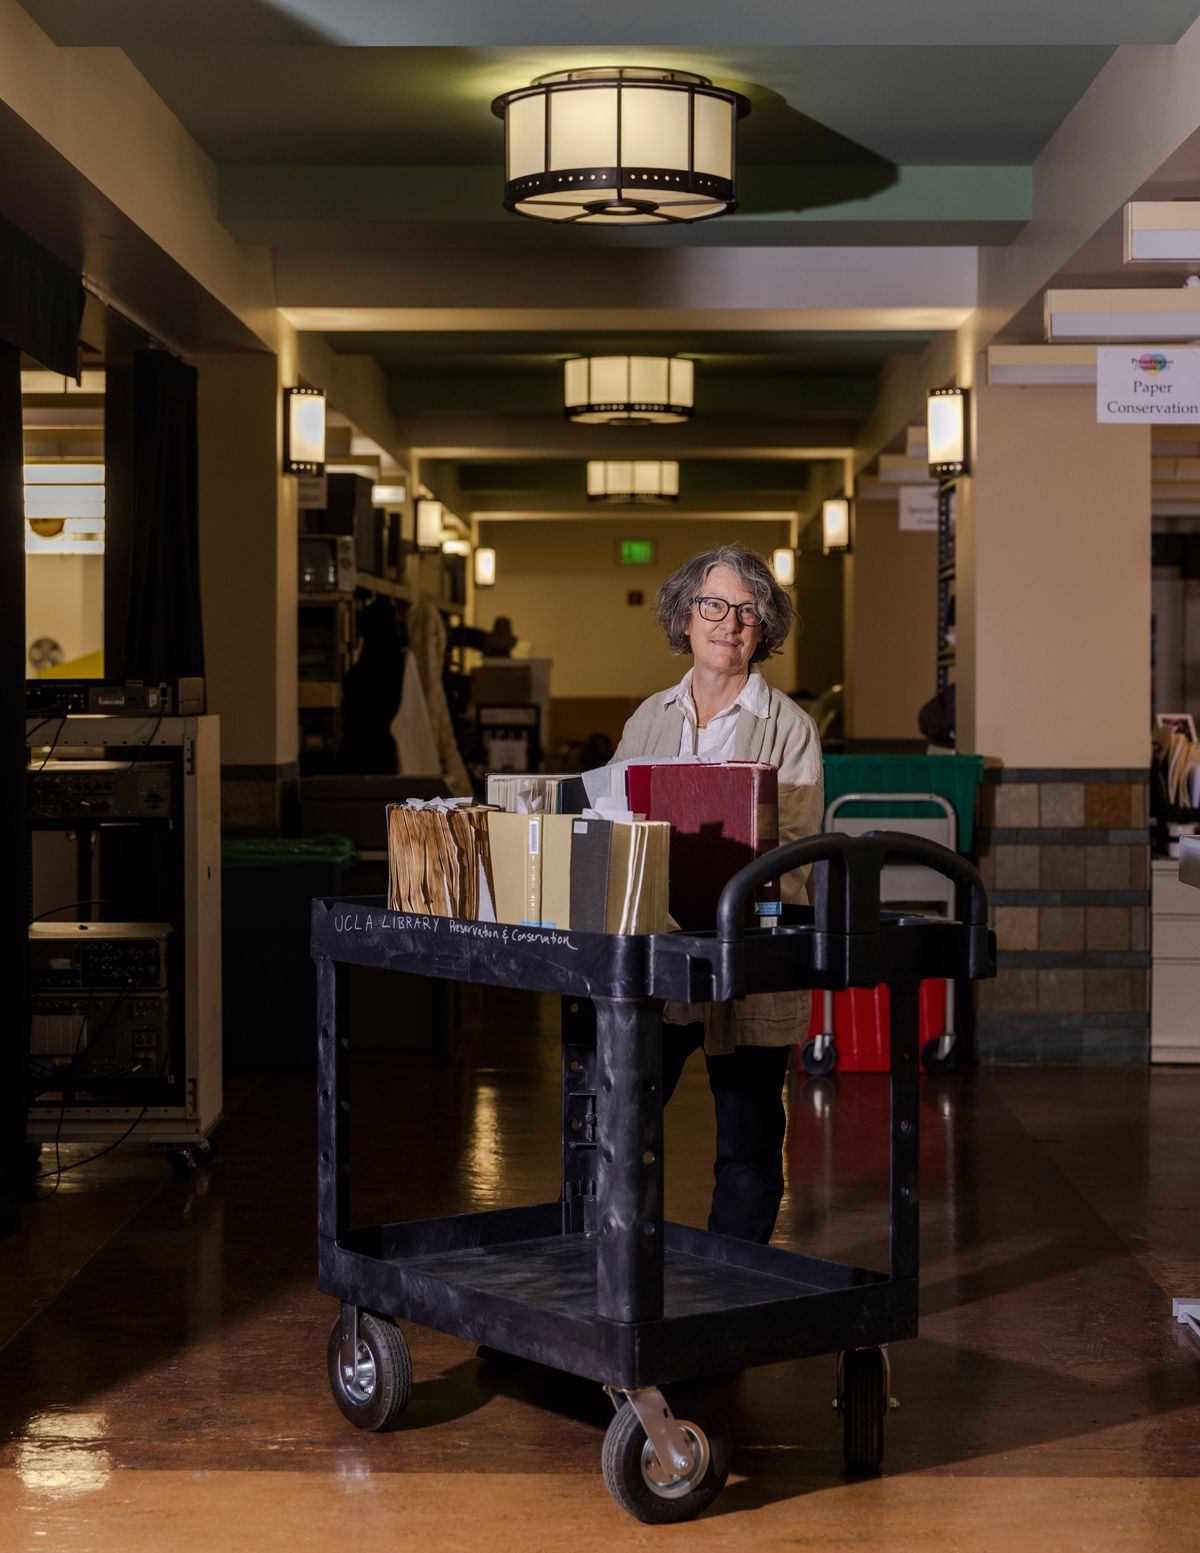 Chela Metzger, the head of preservation and conservation for the U.C.L.A. library, with a cart of books affected by a major equipment failure, that flooded many faculty offices including the library, in Los Angeles on Dec. 21, 2022. U.C.L.A and other institutions are developing new ways to combat humidity and other environmental factors. (Jessica Pons/The New York Times)  (JESSICA PONS)